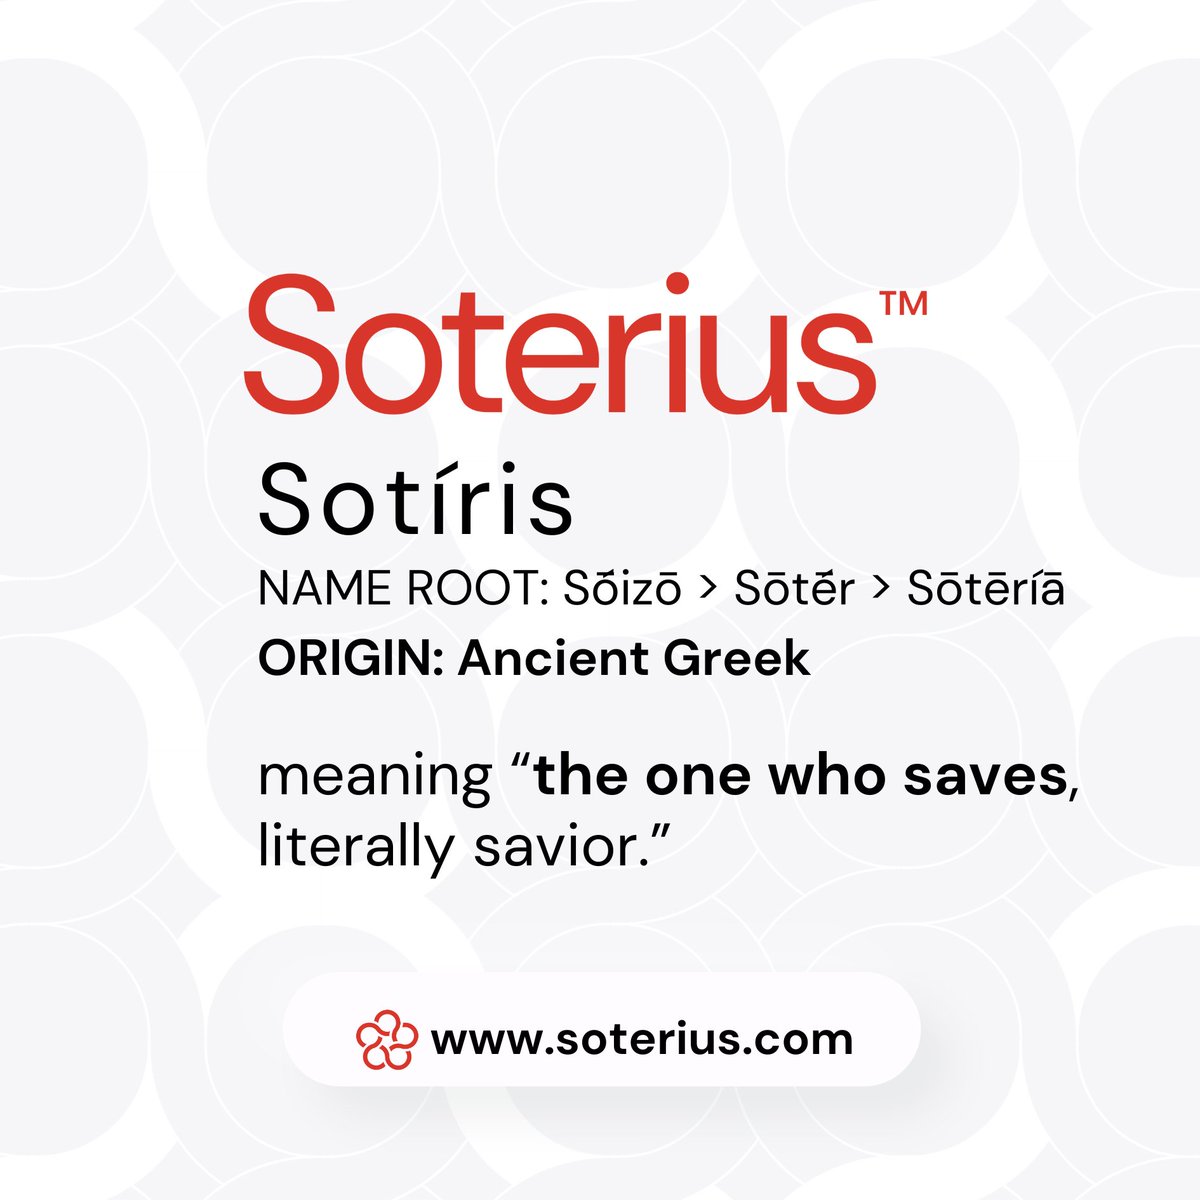 Resurrecting the noble ethos of Soterius: drawing from Indo-Greek mythology, where ‘Soter’ symbolizes safety and deliverance, we embody this spirit in our pharma endeavors.  #Soterius #Pharmacovigilance #ClinicalInnovation #SafetyManagement #UNITYdxRevolution